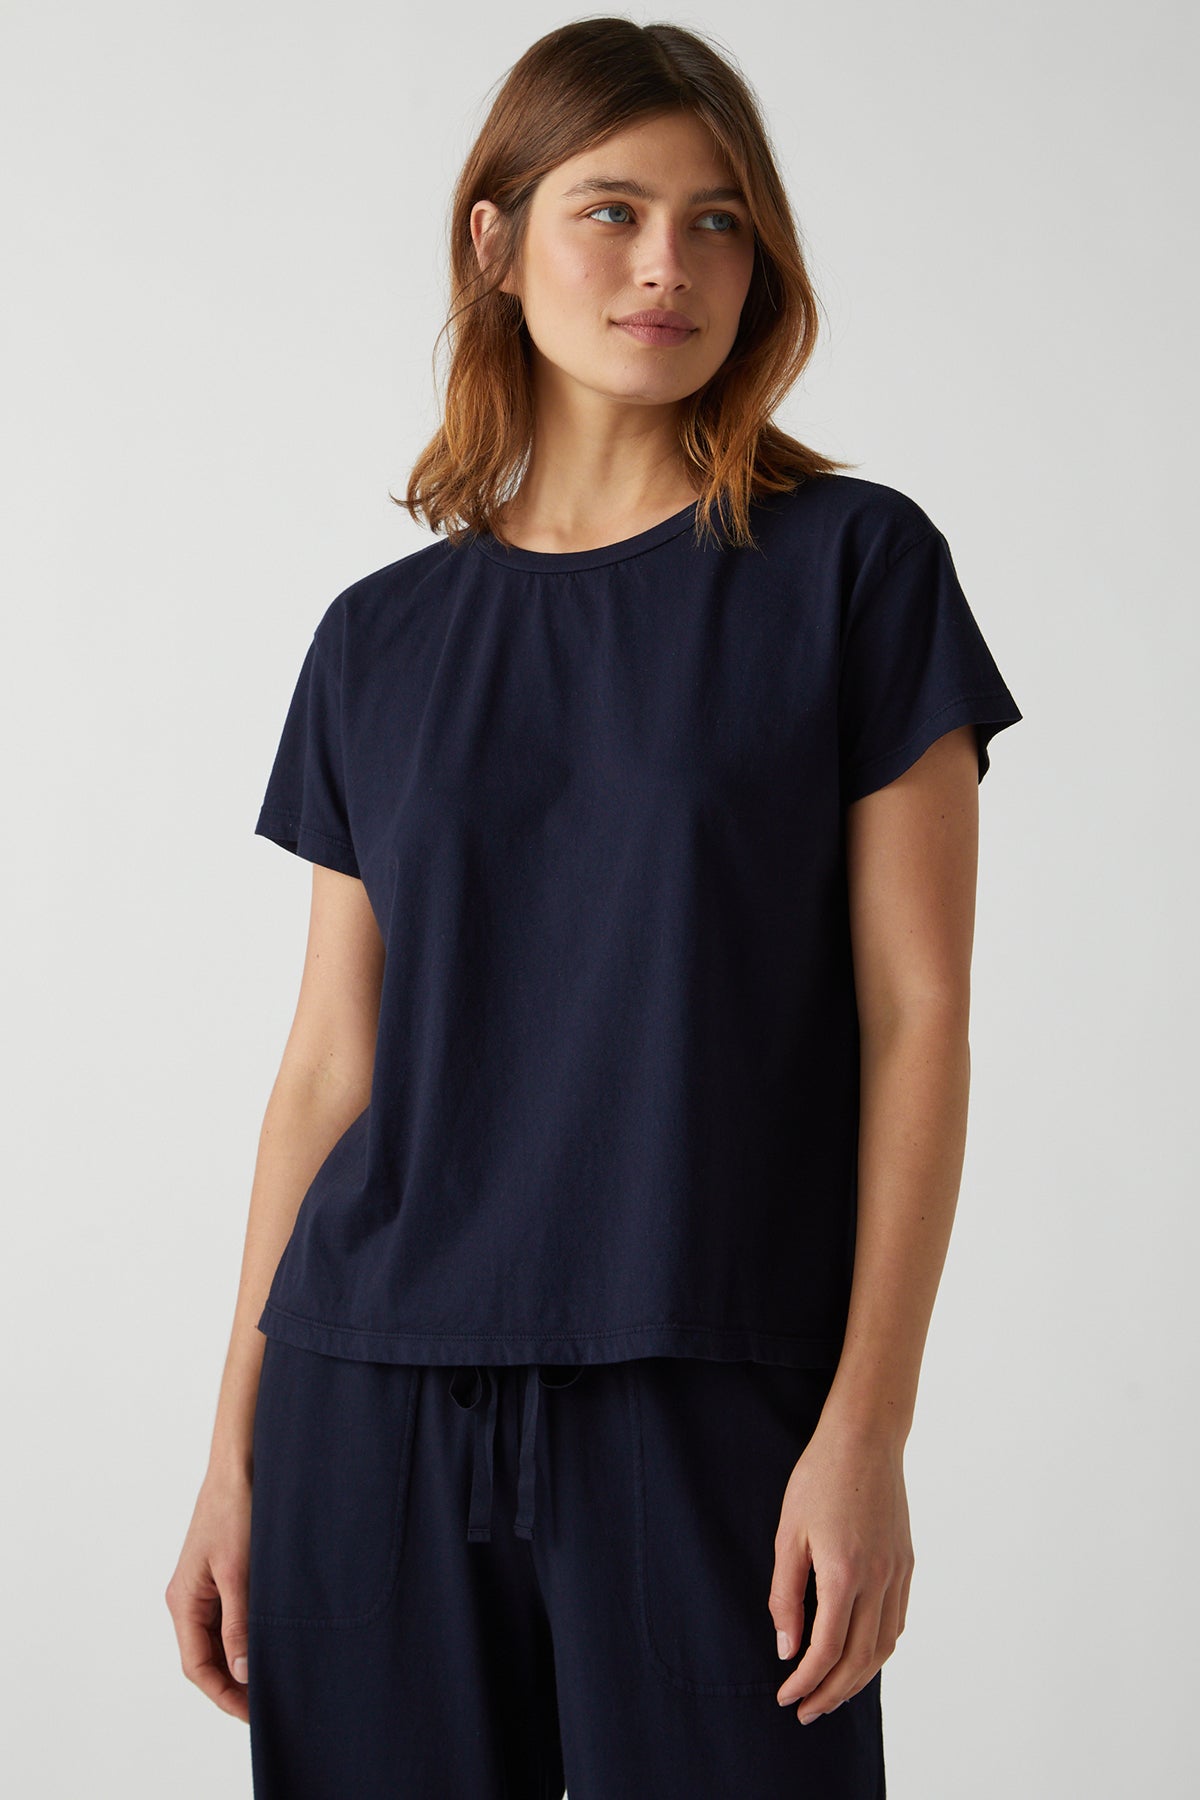 Topanga Tee in navy with Pismo Sweatpant front-25484453576897